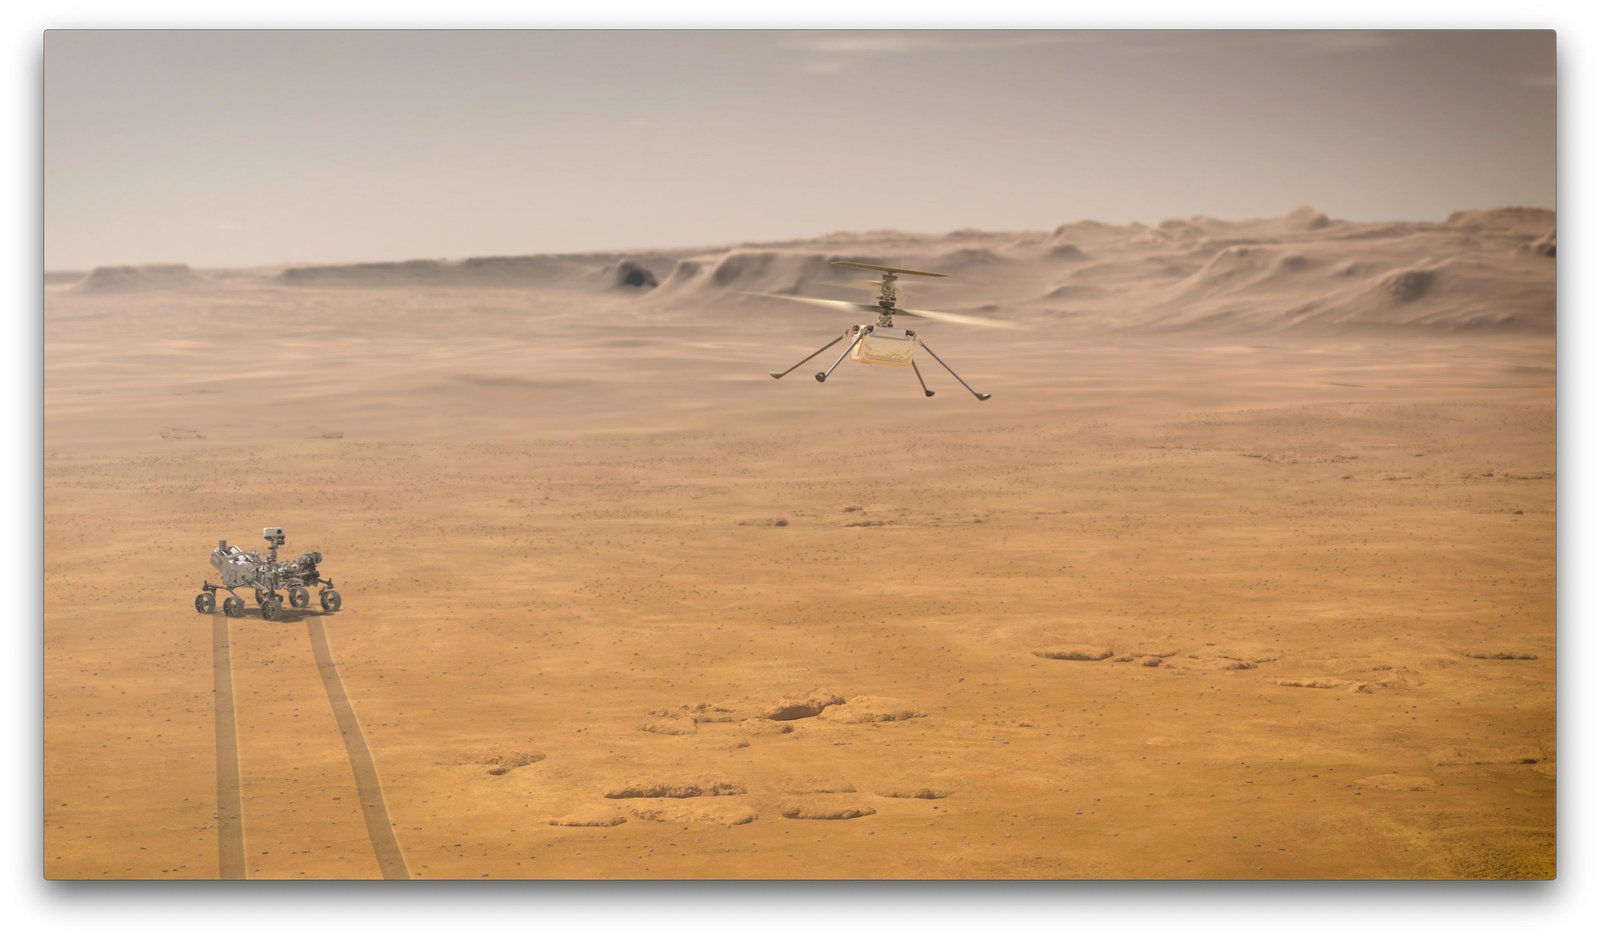 When NASA's Ingenuity Mars Helicopter attempts its first test flight on the Red Planet, the agency's Mars 2020 Perseverance rover will be close by, as seen in NASA's concept.